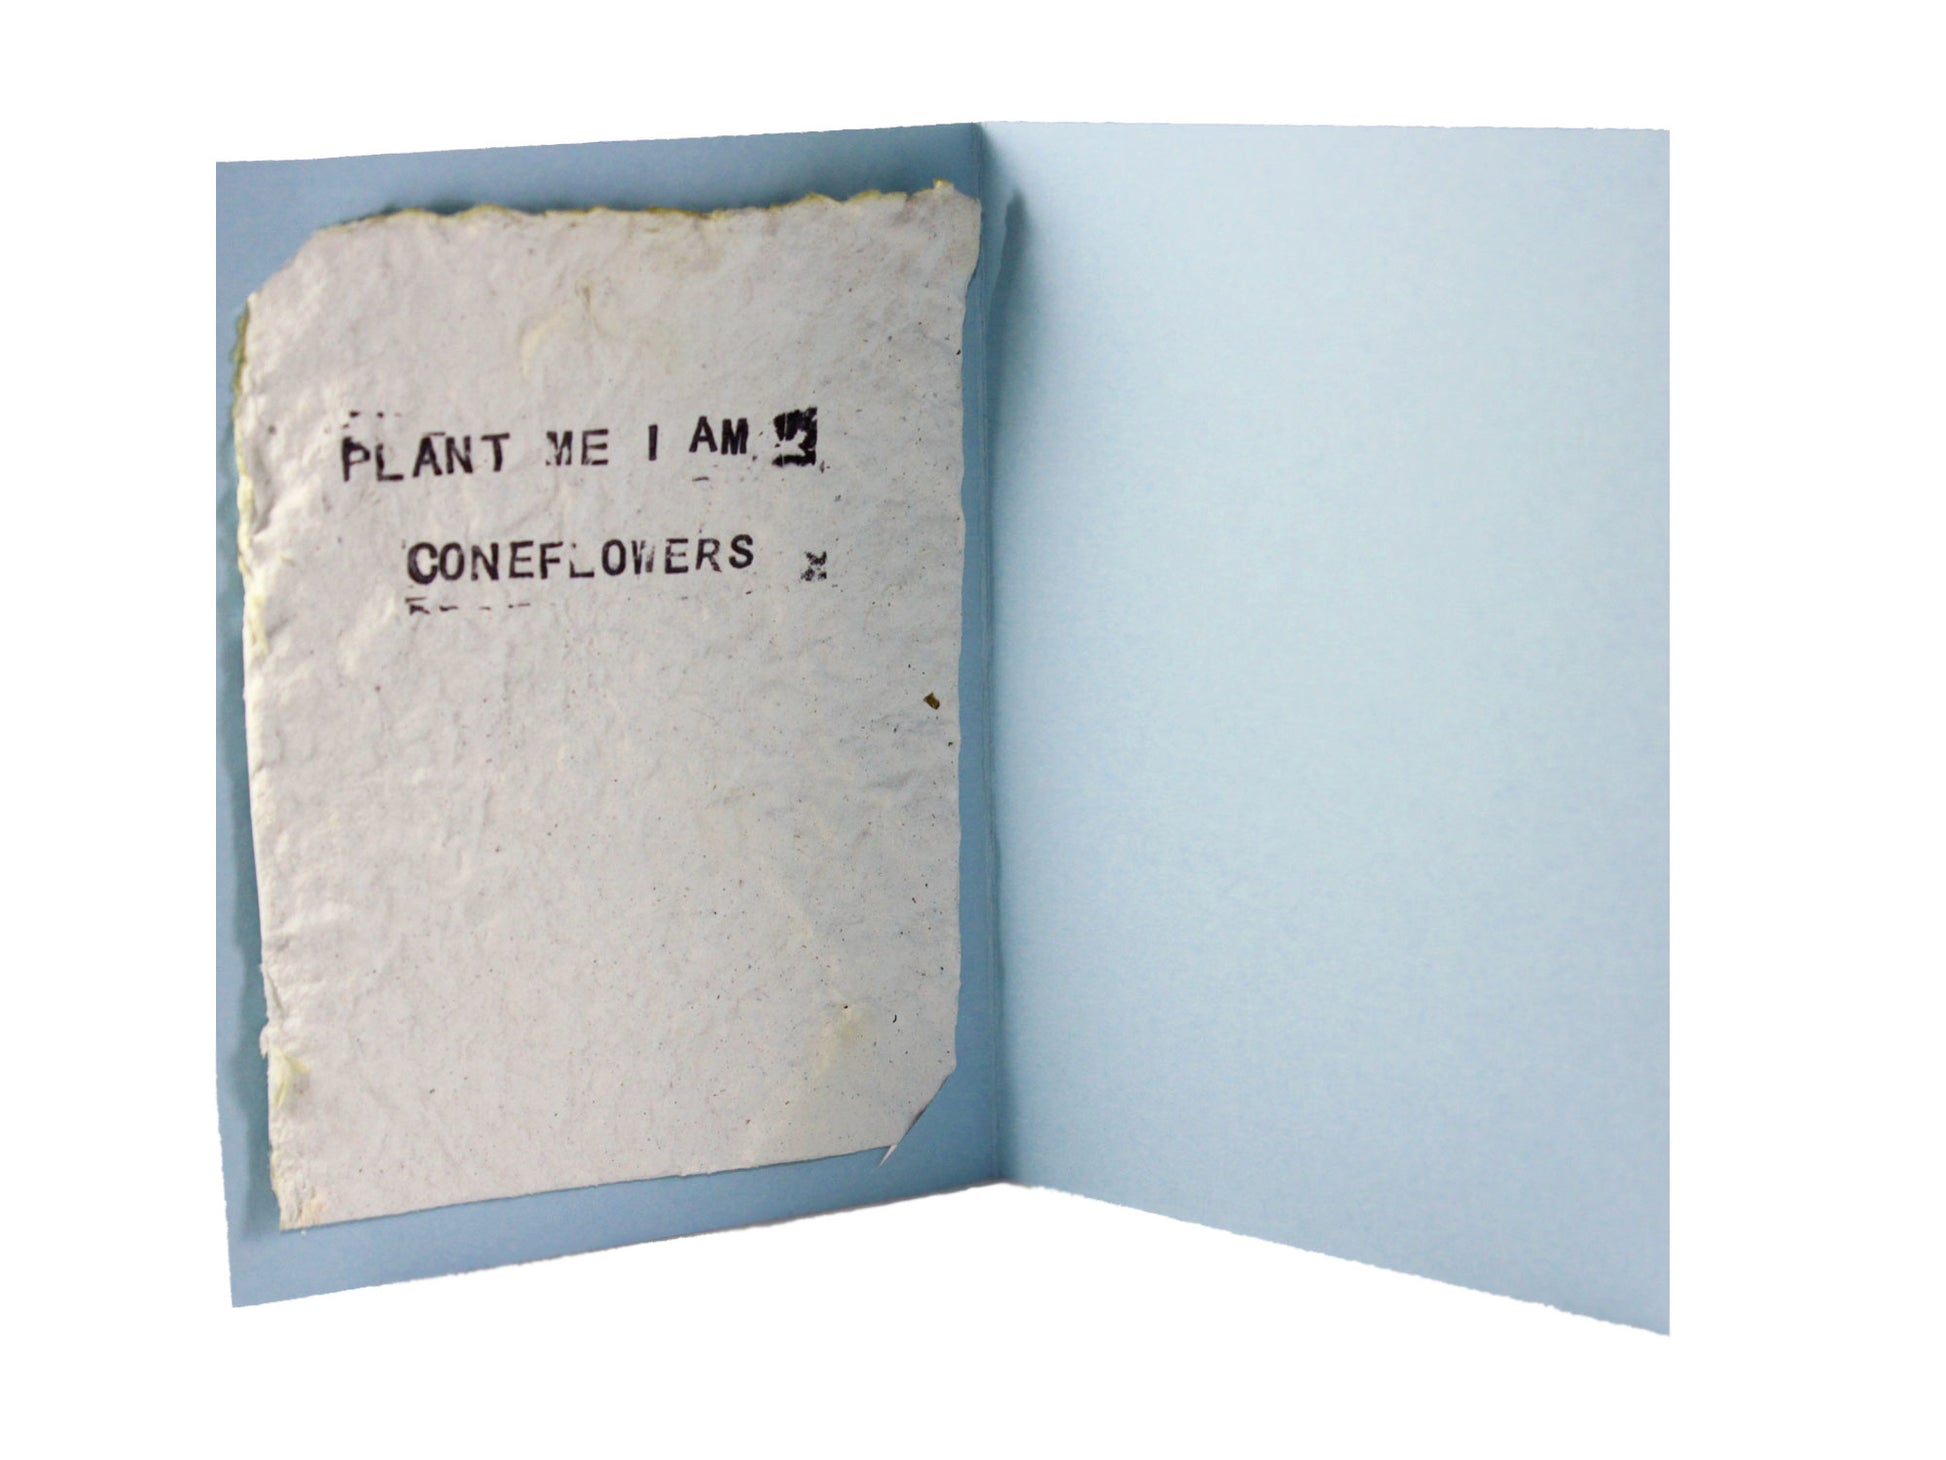 Interior of seed paper card with seed paper featuring a stamp that says "PLANT ME I AM CONEFLOWERS"